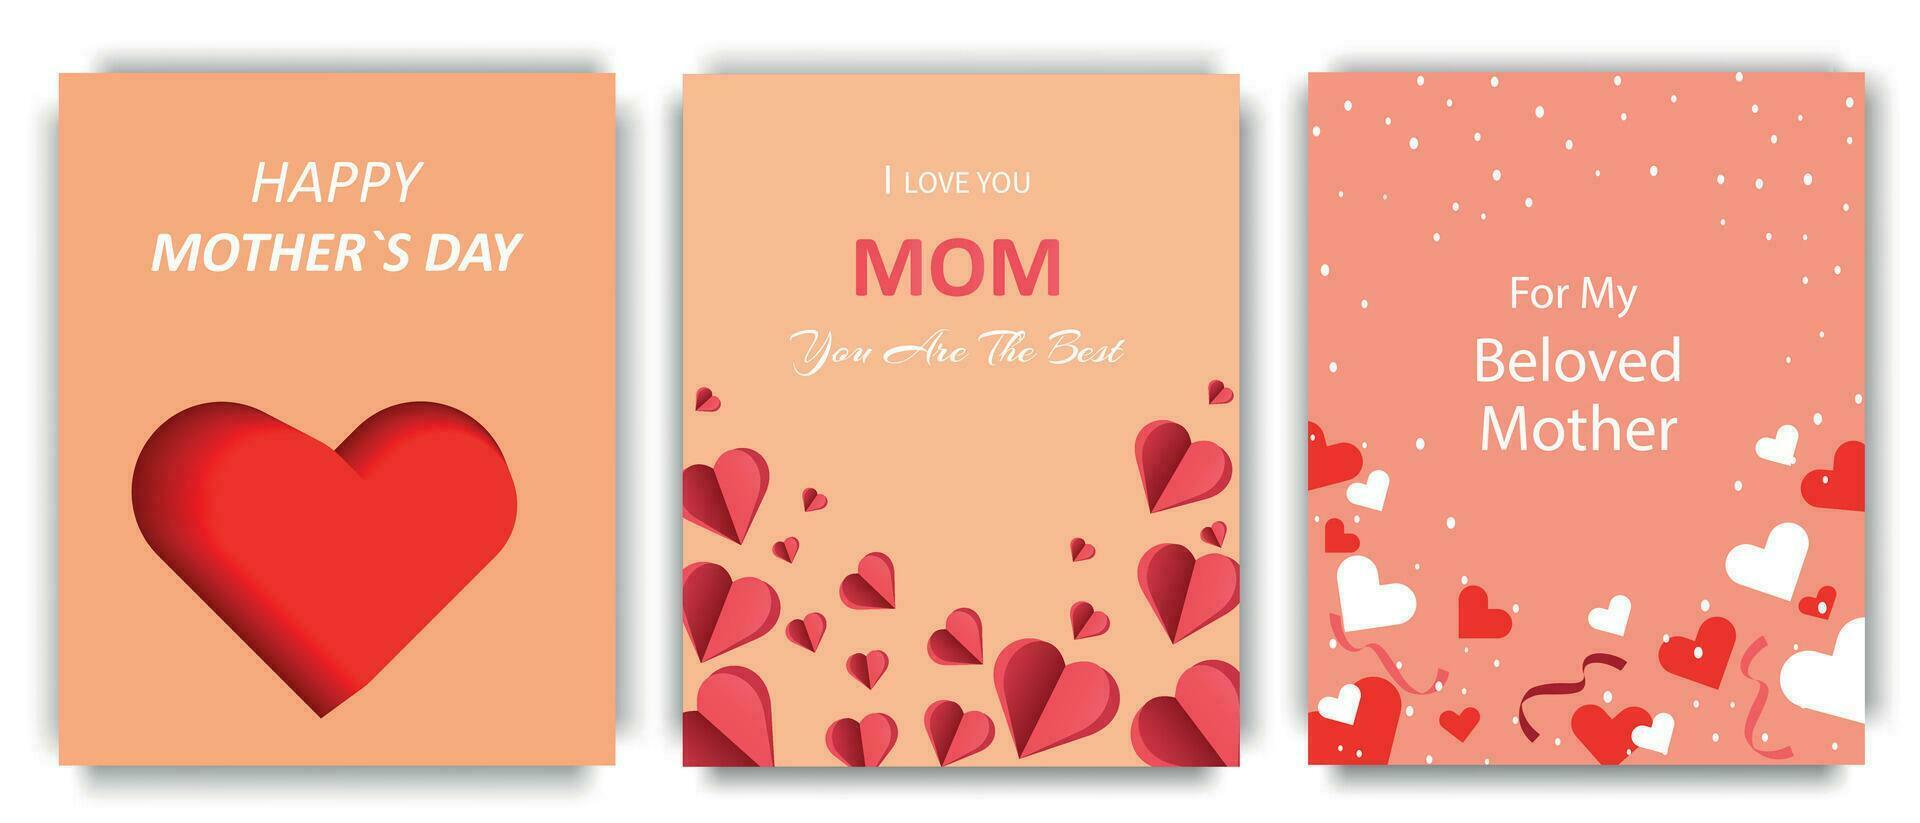 Set of Mothers Day greeting cards with red and white hearts on a peach background. Vector illustration.